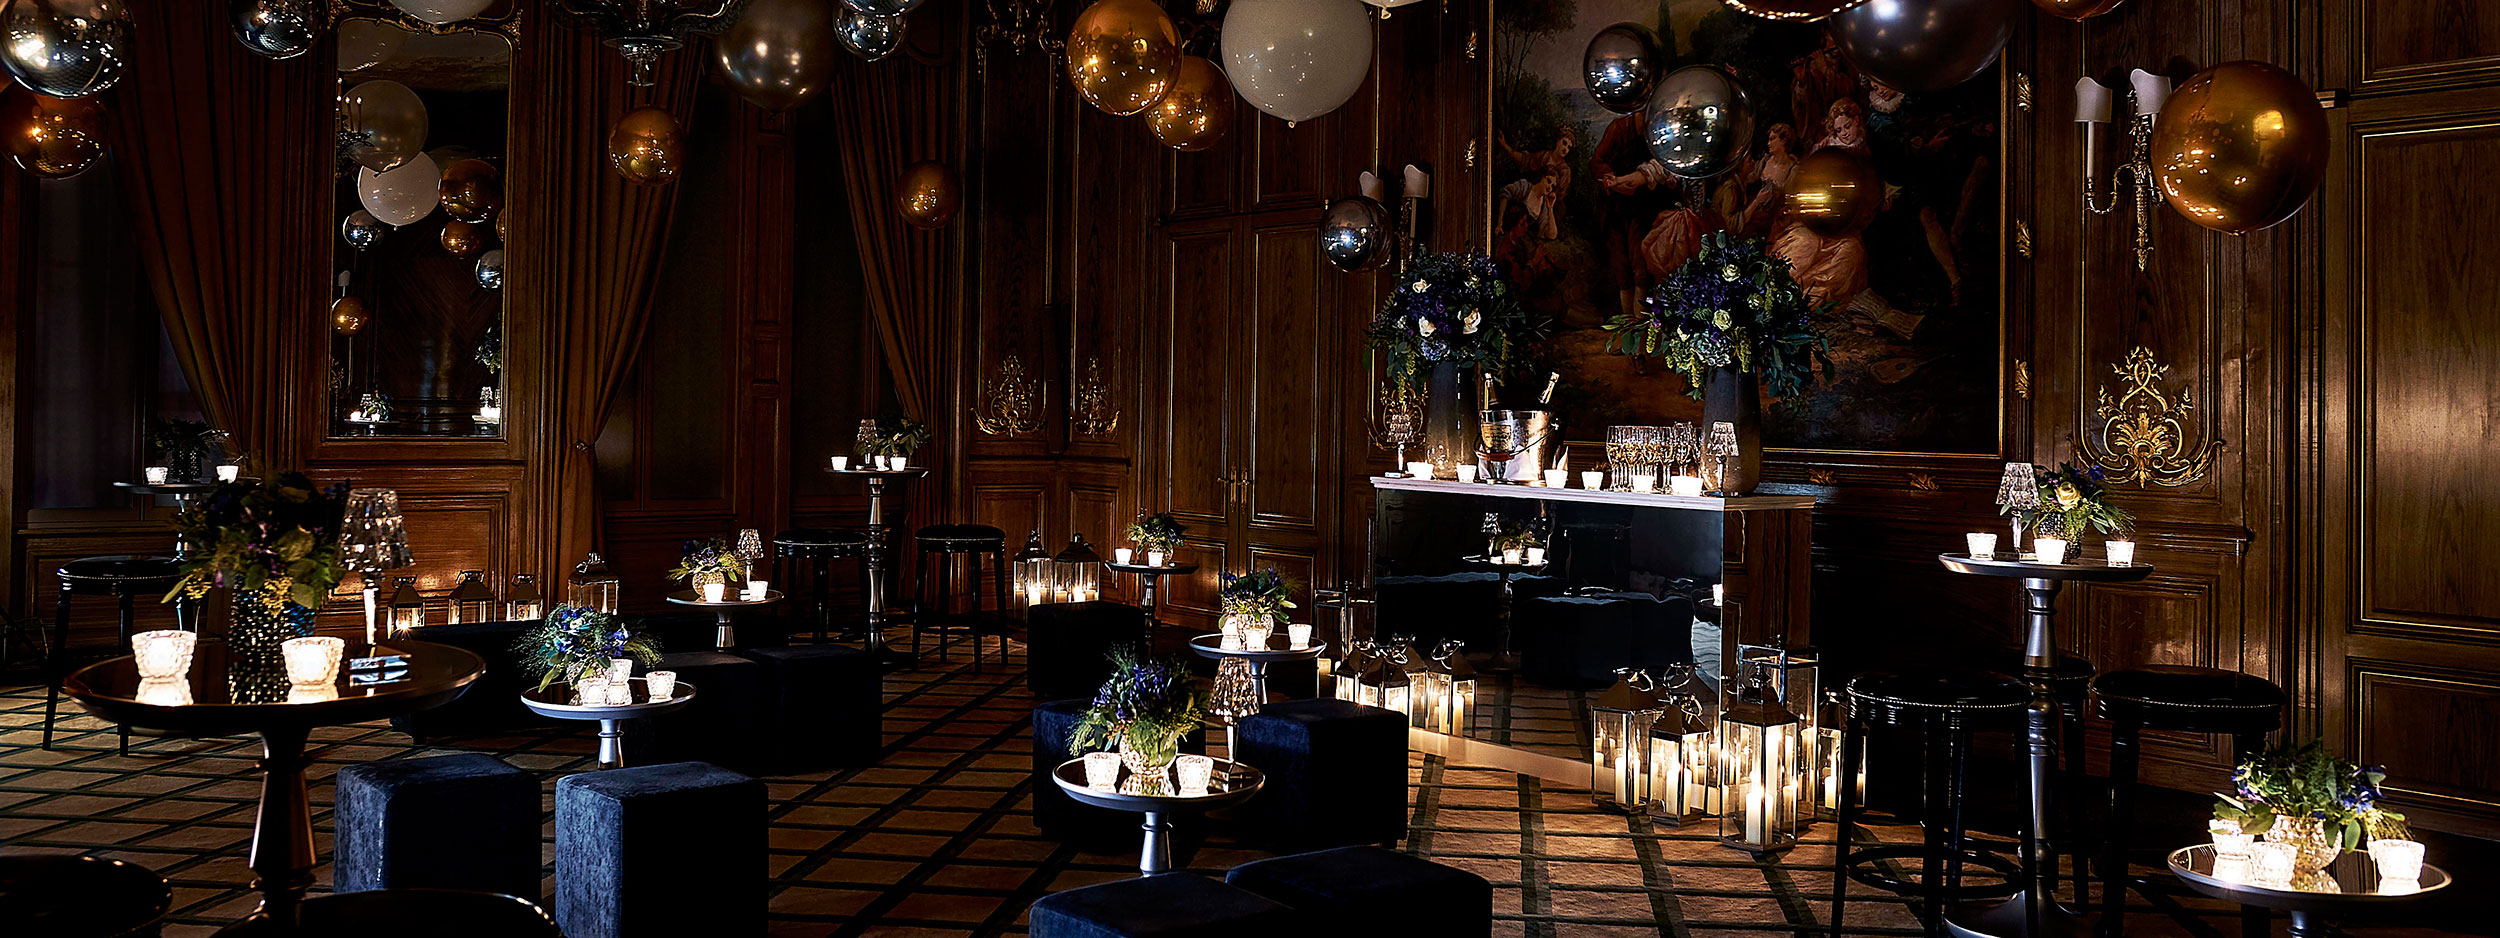 The setting for a salon party, with balloons and a warm atmosphere in the French Salon.